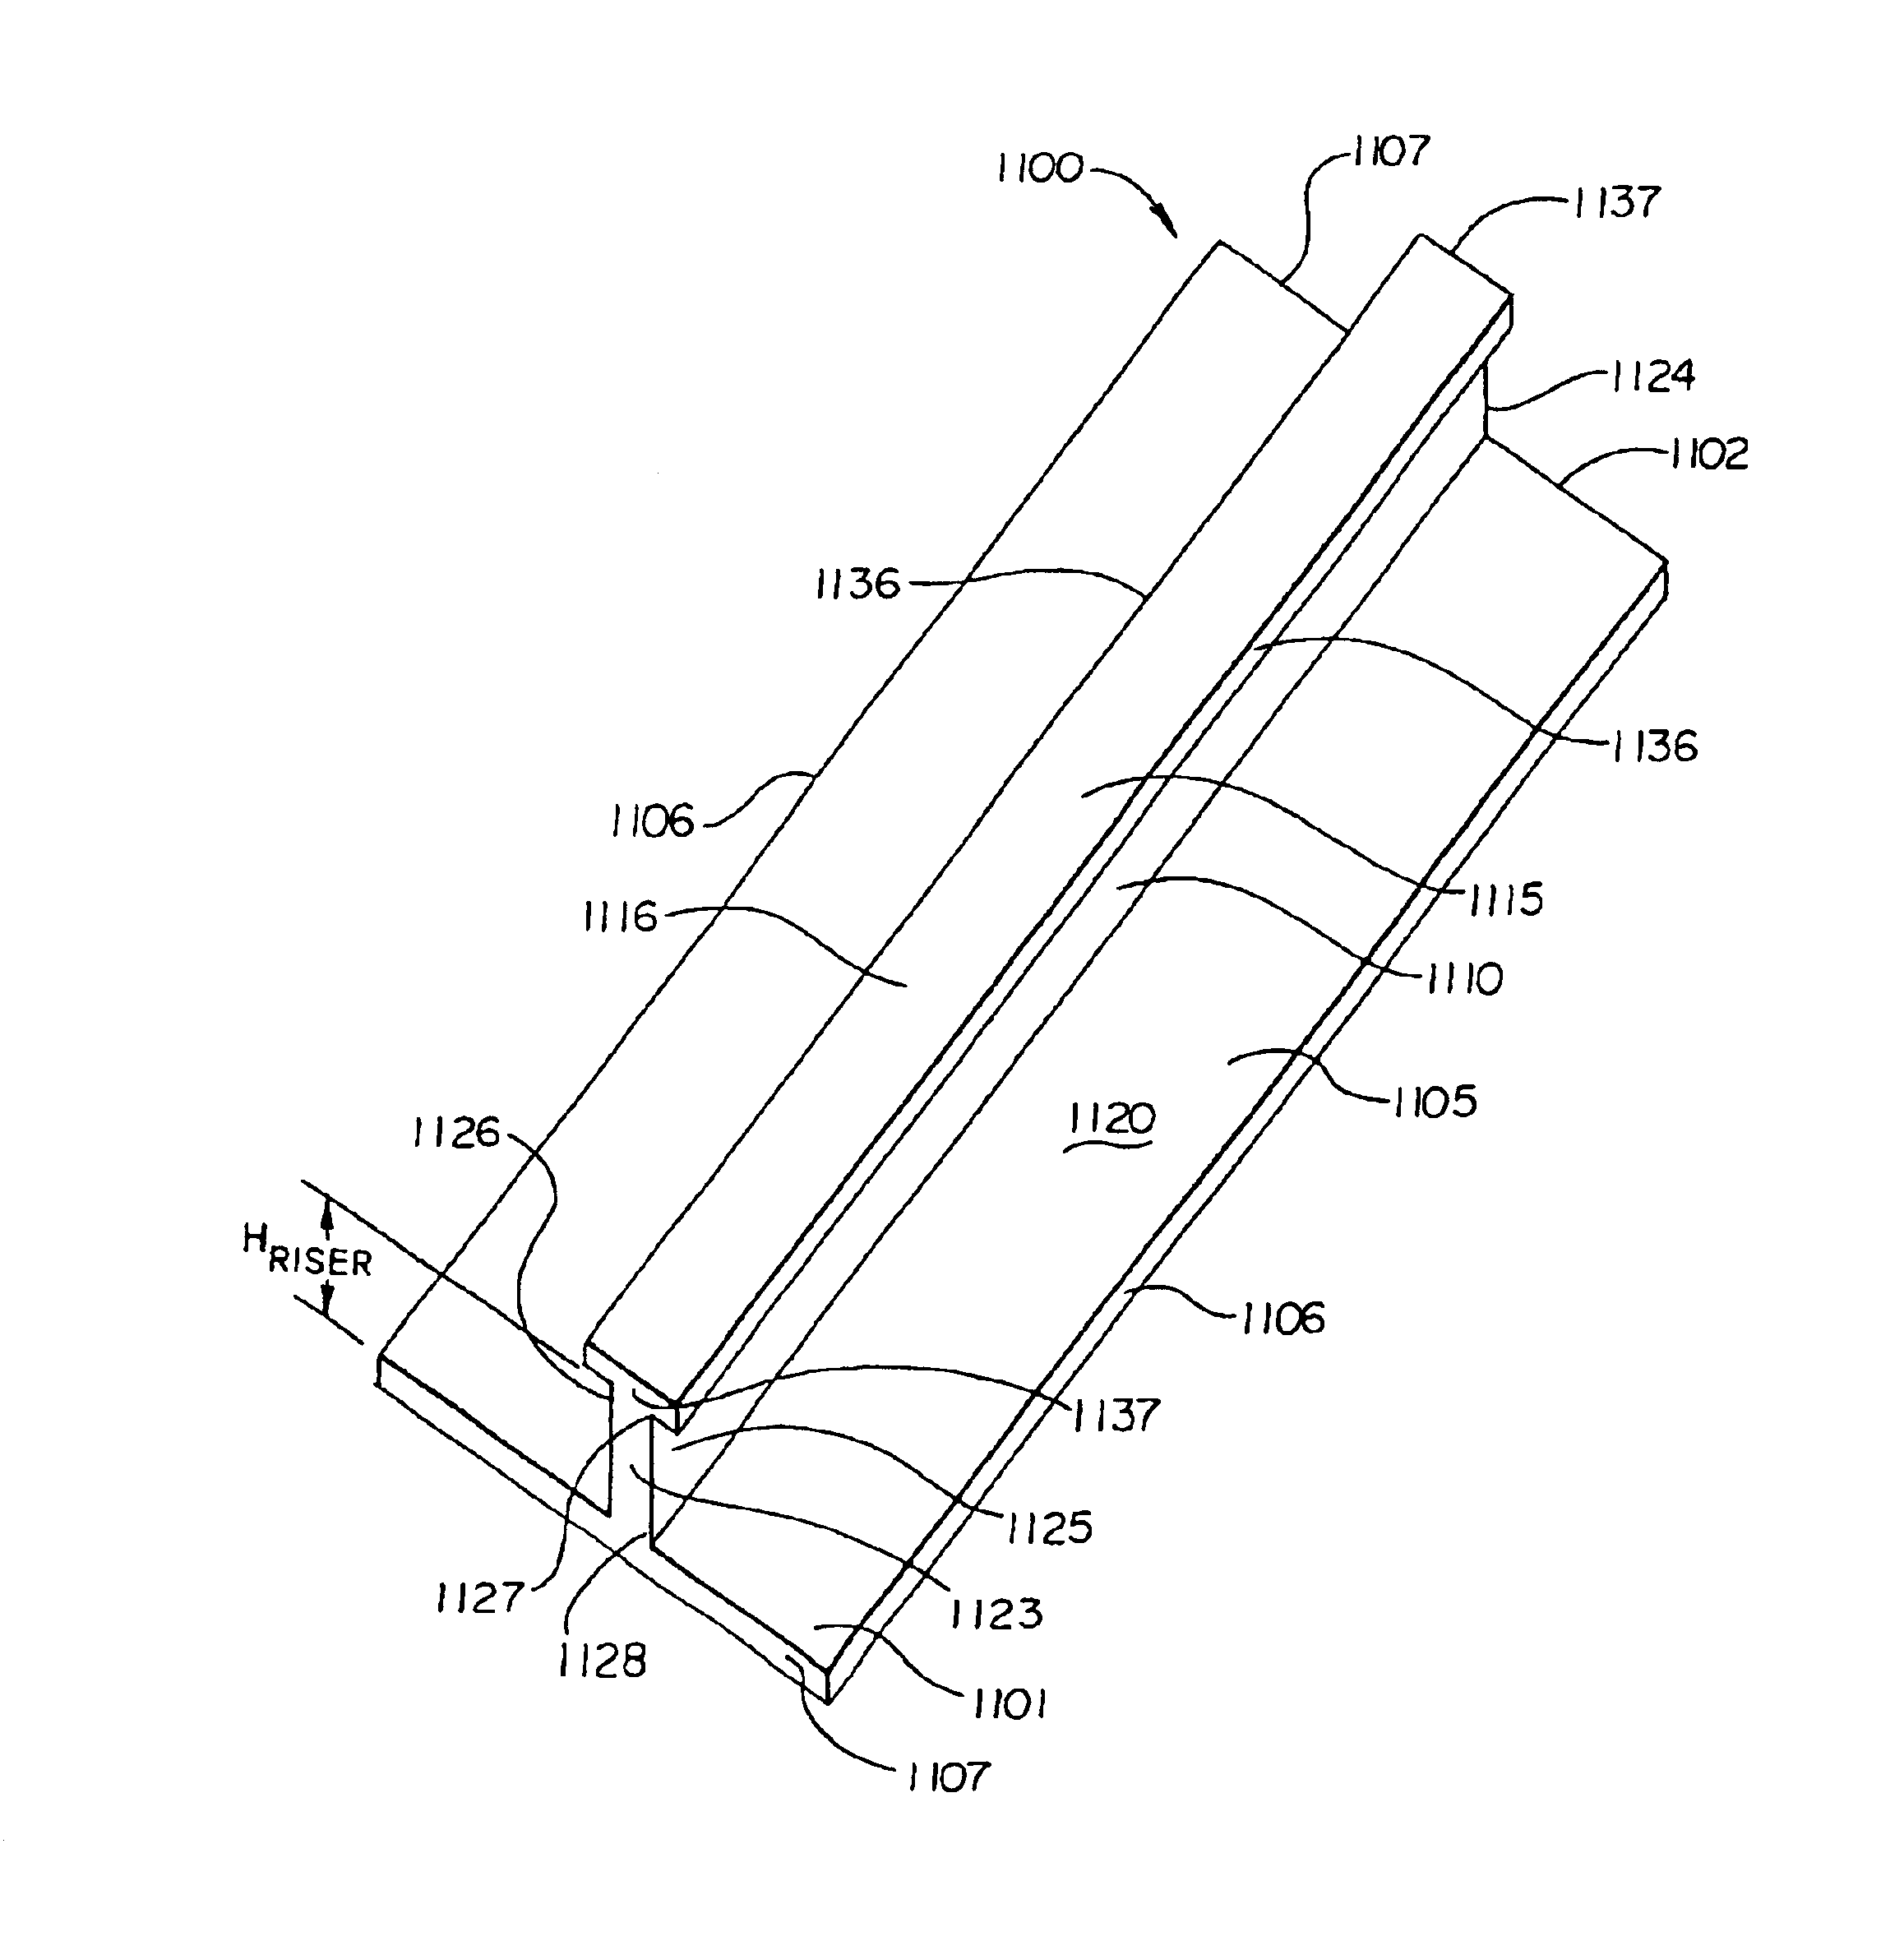 Subcutaneous electrode for transthoracic conduction with low-profile installation appendage and method of doing same